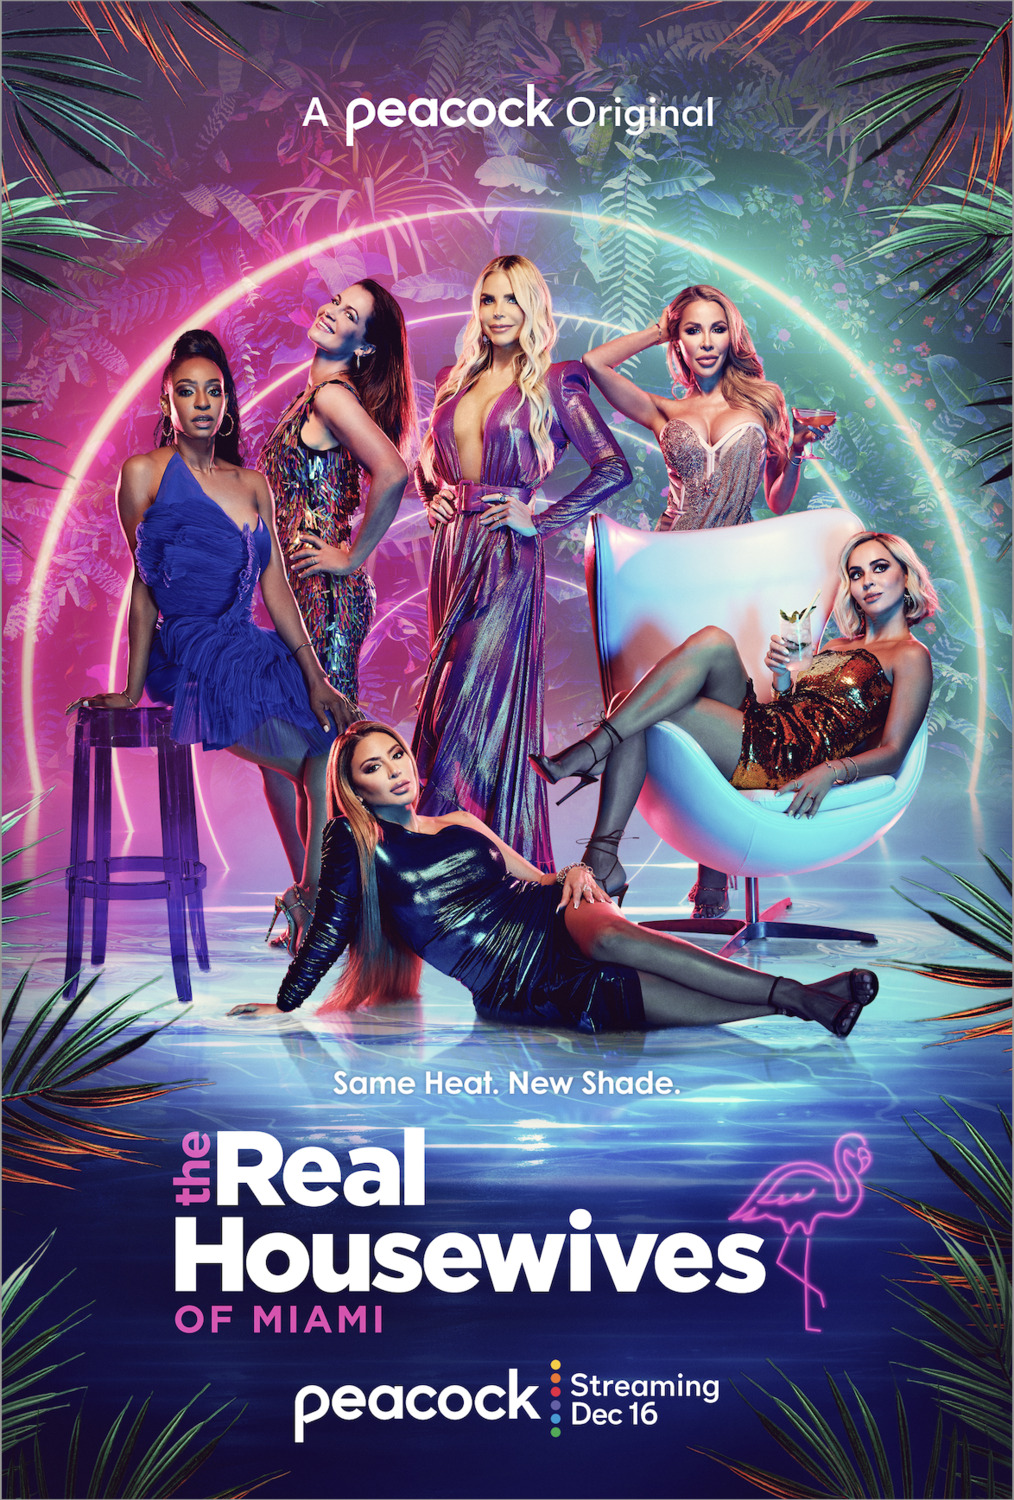 Extra Large TV Poster Image for The Real Housewives of Miami 2021 